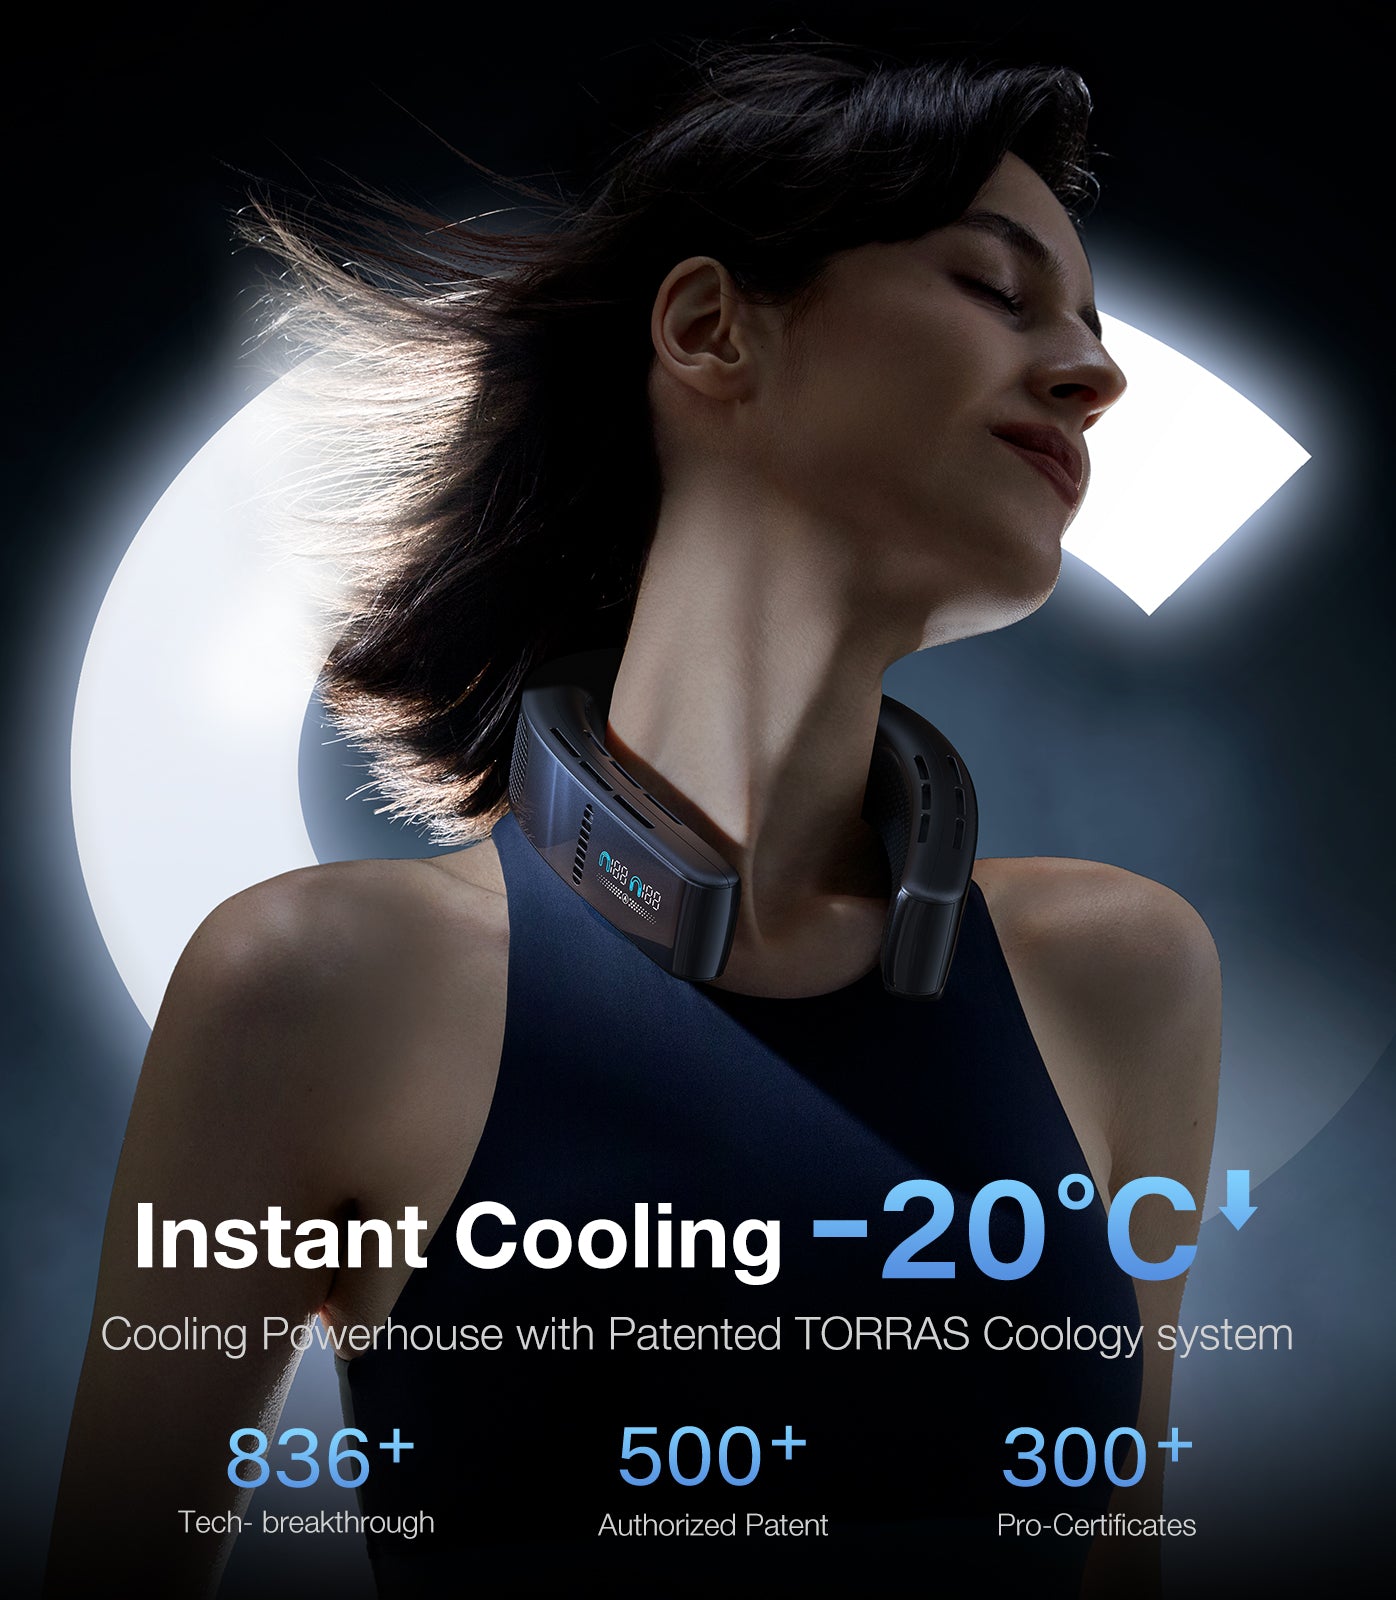 COOLiFY Cyber Portable Air Conditioner | Neck Air Conditioner - TORRAS